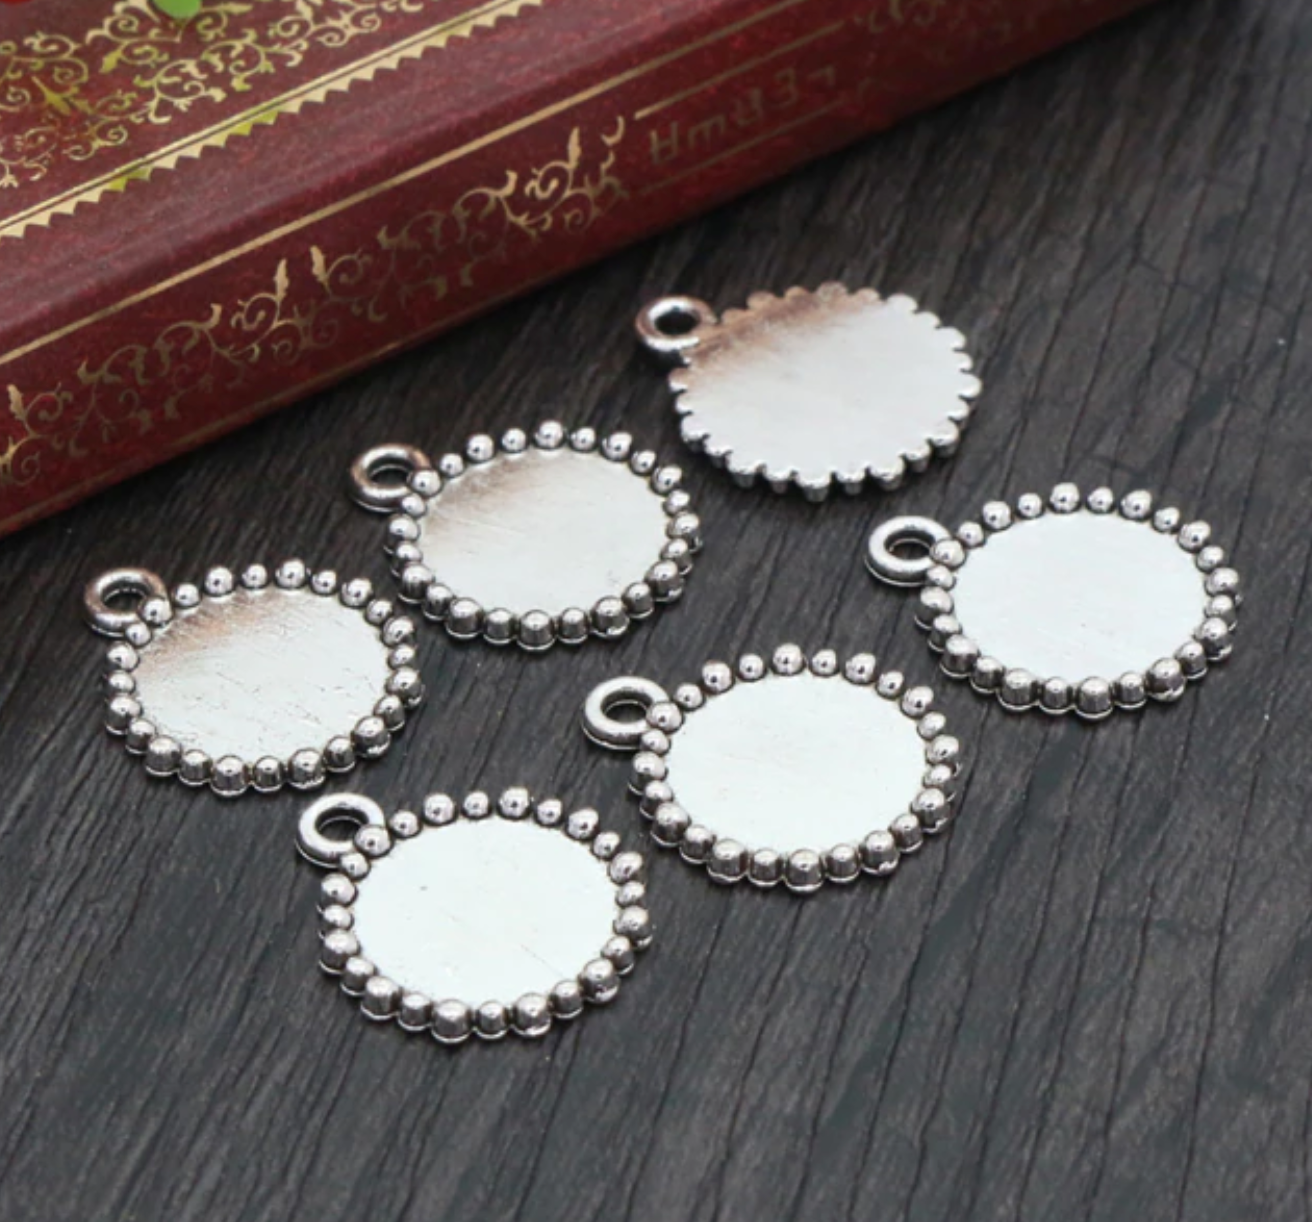 5pcs, 12mm Inner Setting,  High Quality Iron Material Pendant Cabochon II - choose your colour